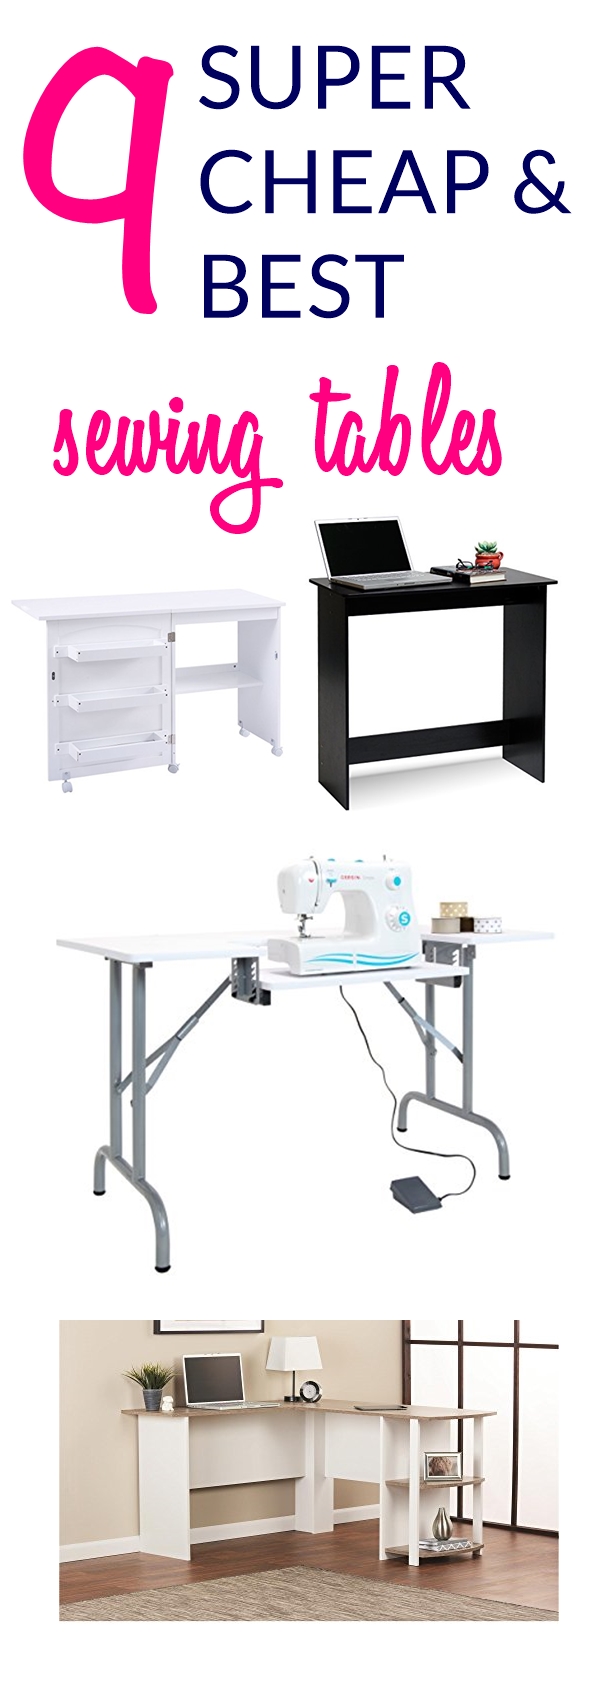 sewing cutting table | CHEAP SEWING tables | sewing machine tables | sewing tables | 